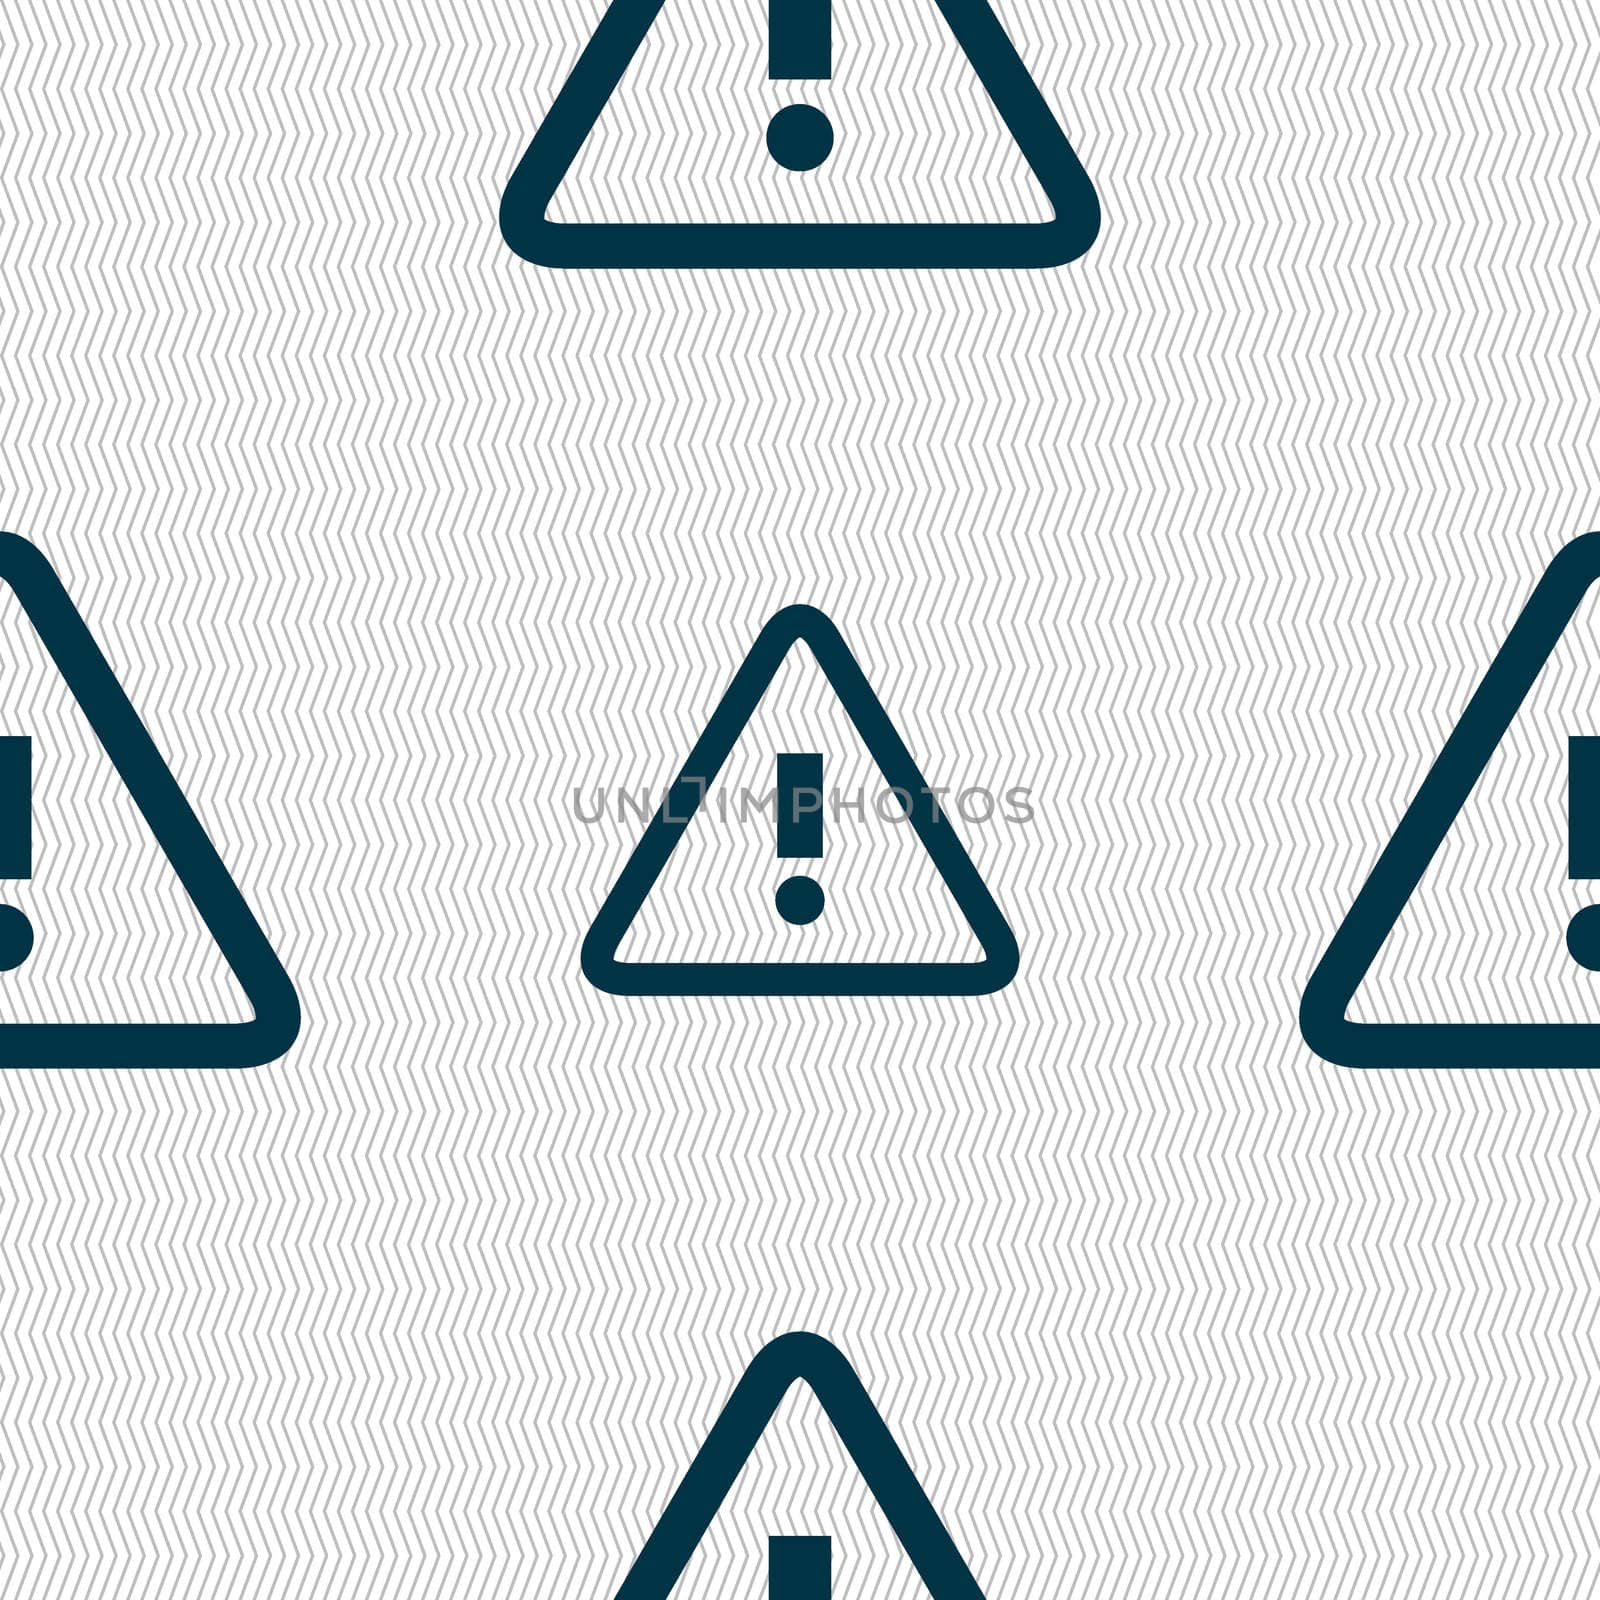 Attention caution sign icon. Exclamation mark. Hazard warning symbol. Seamless abstract background with geometric shapes.  by serhii_lohvyniuk